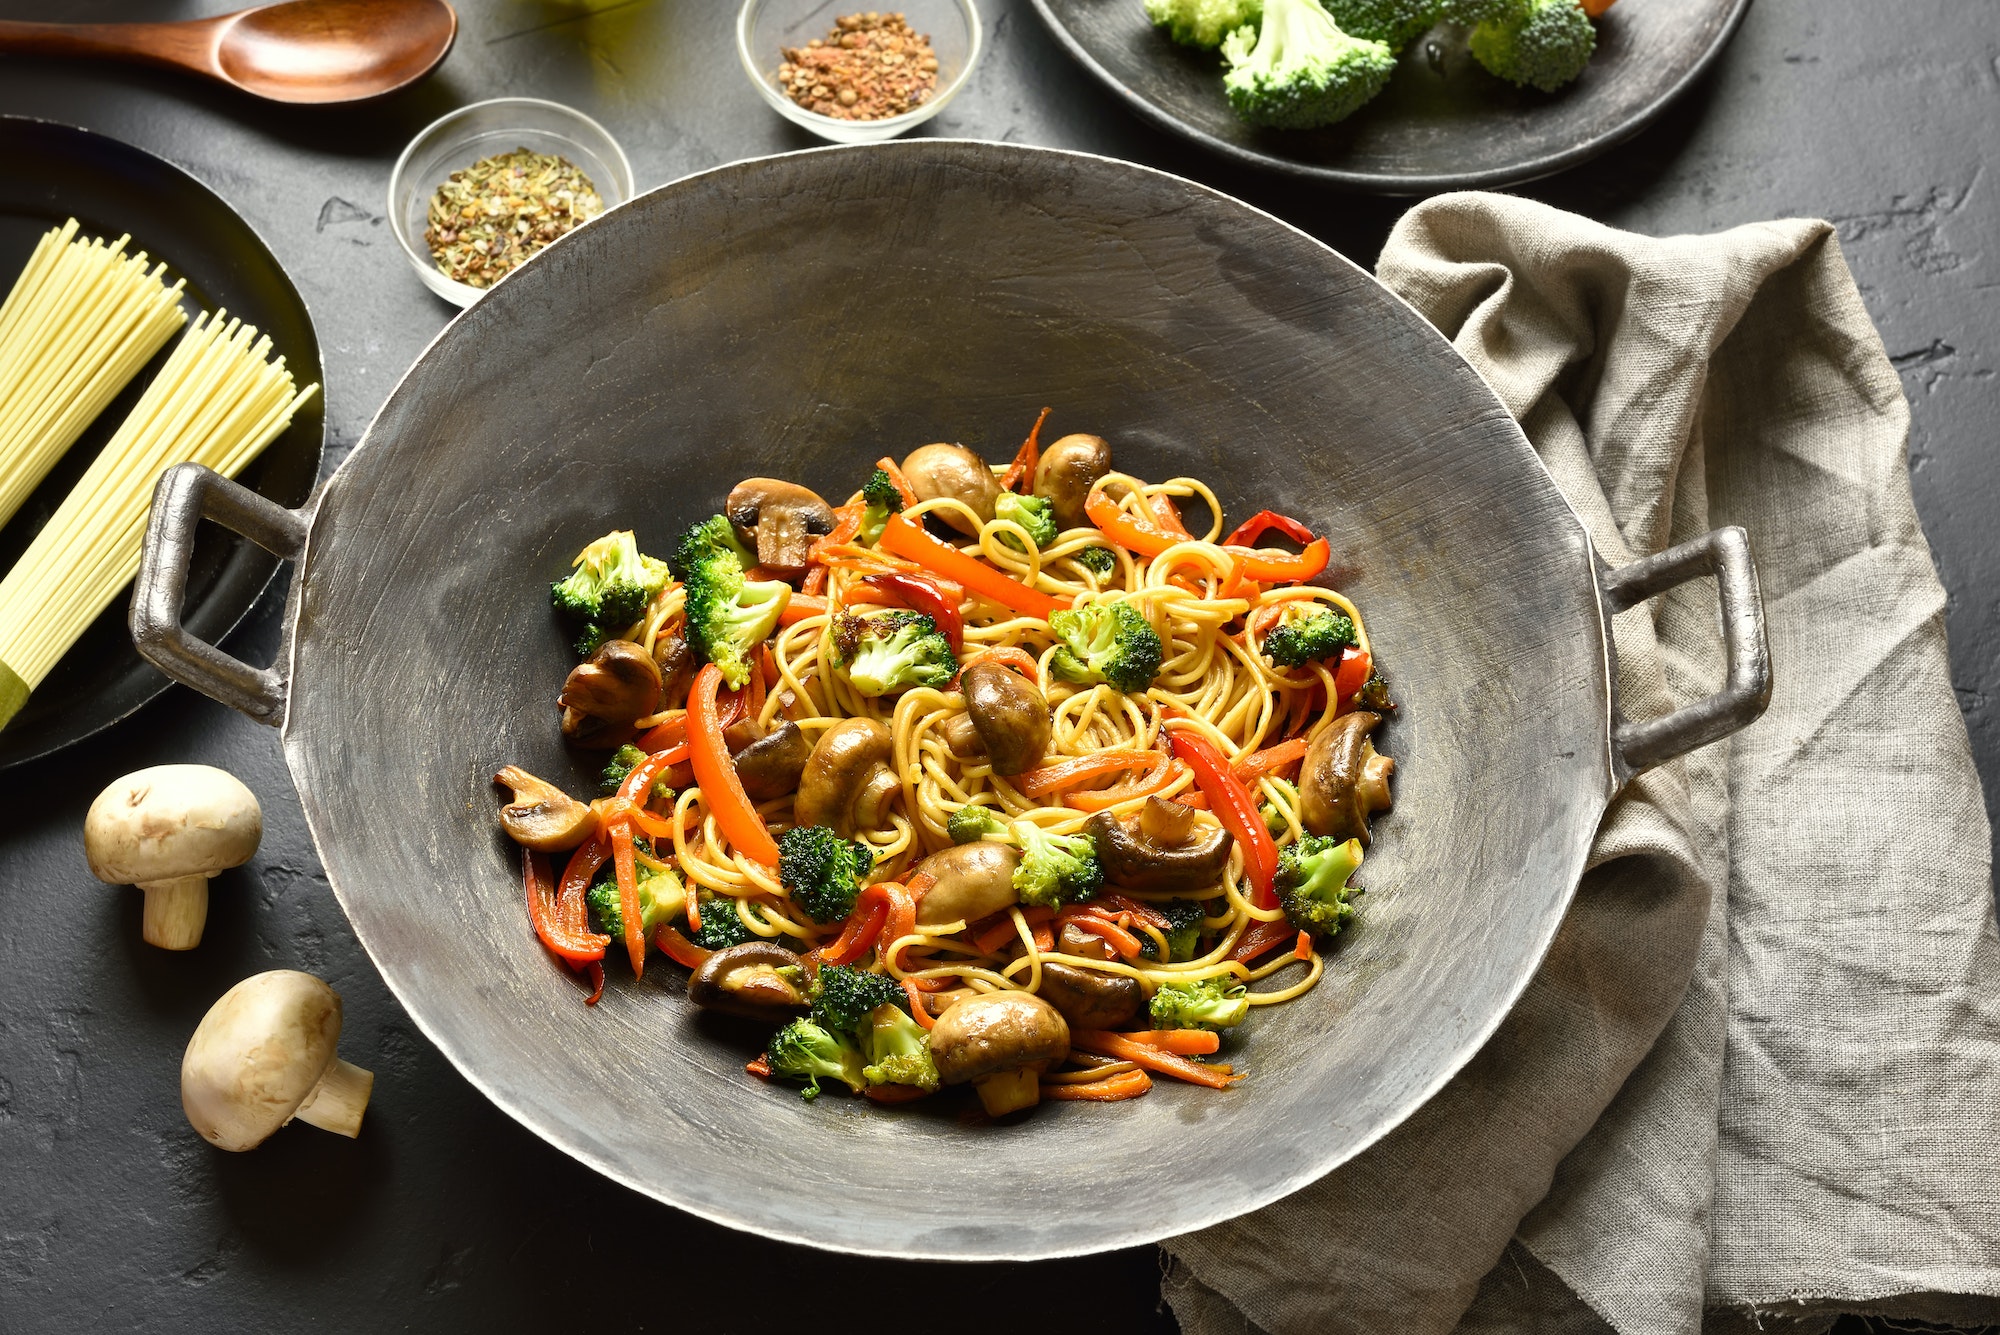 Noodles with vegetables in wok